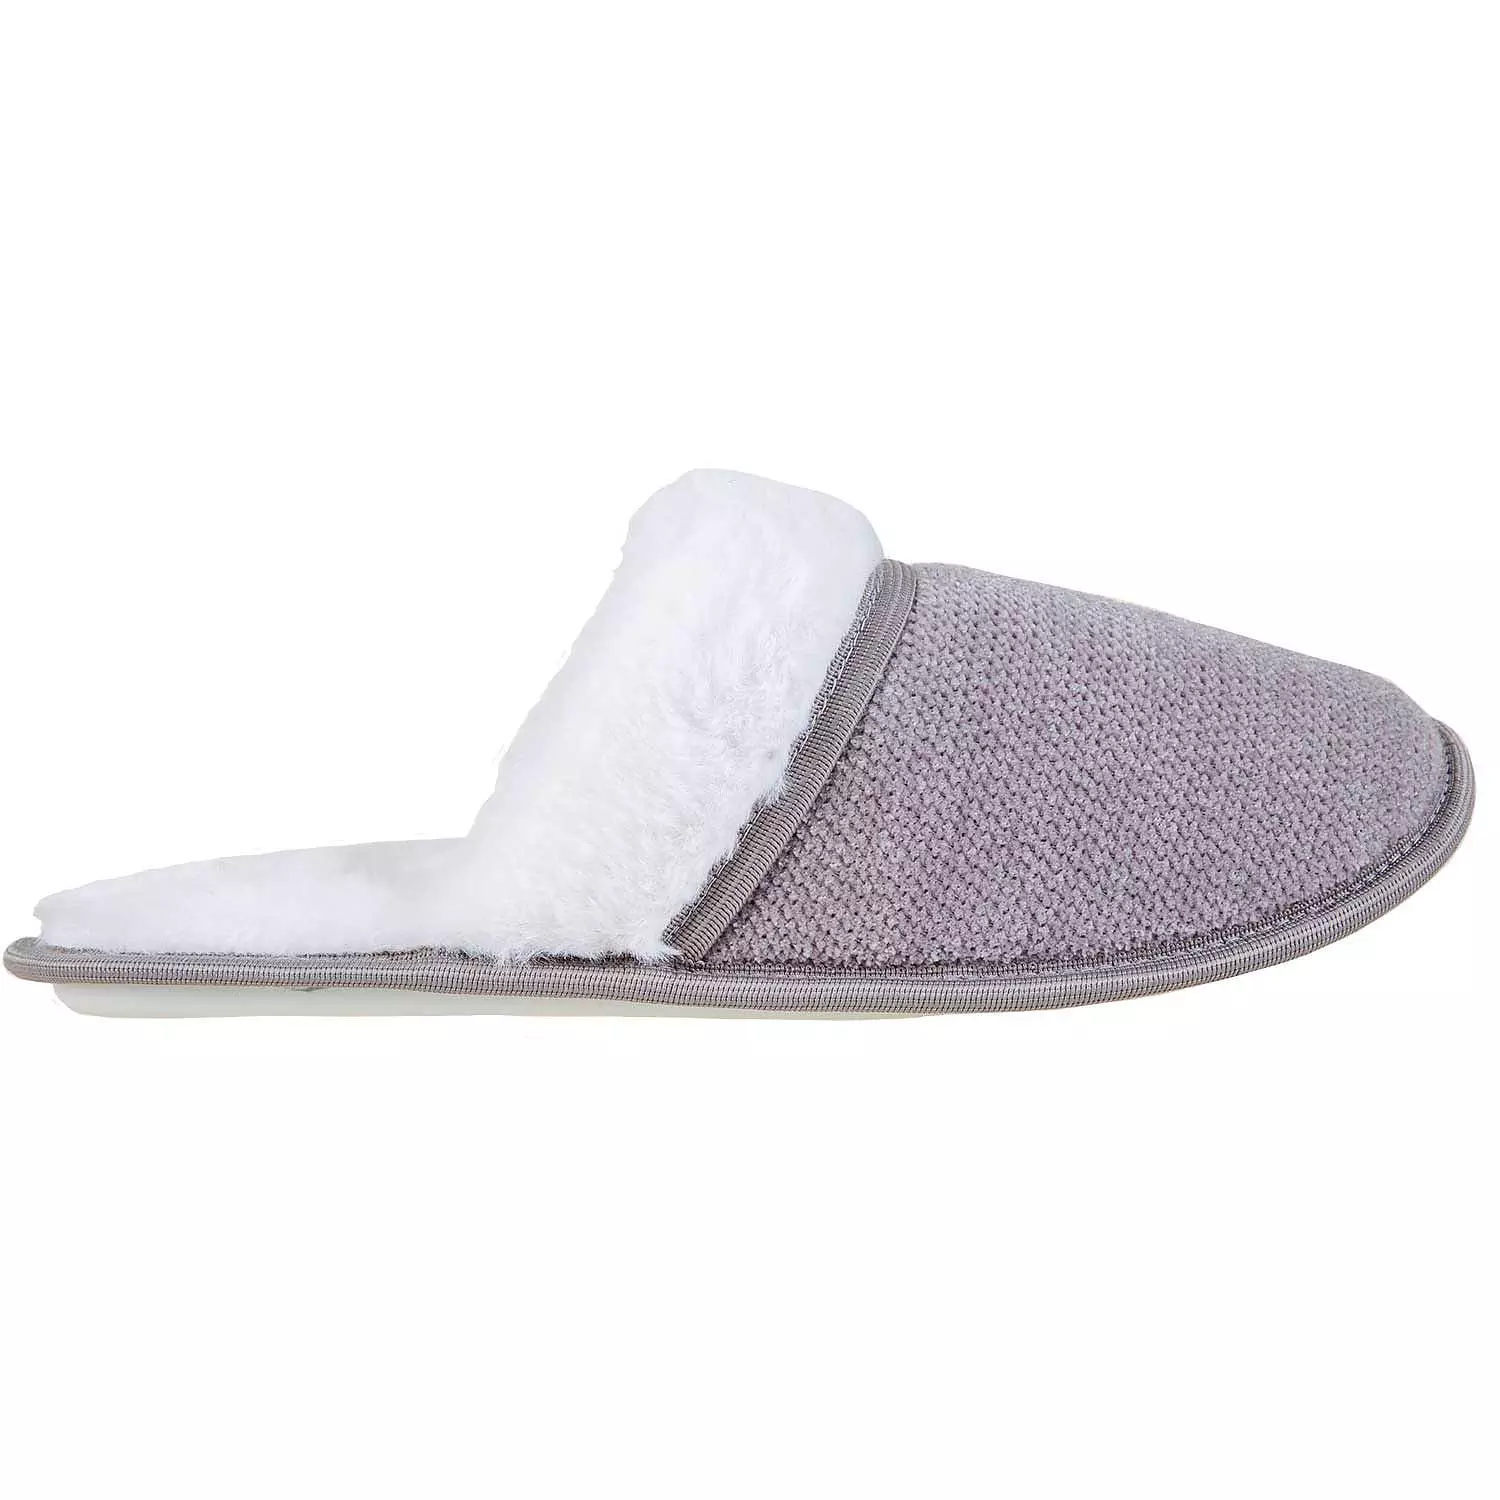 Faux fur lined and cuffed slippers, grey, large (L)